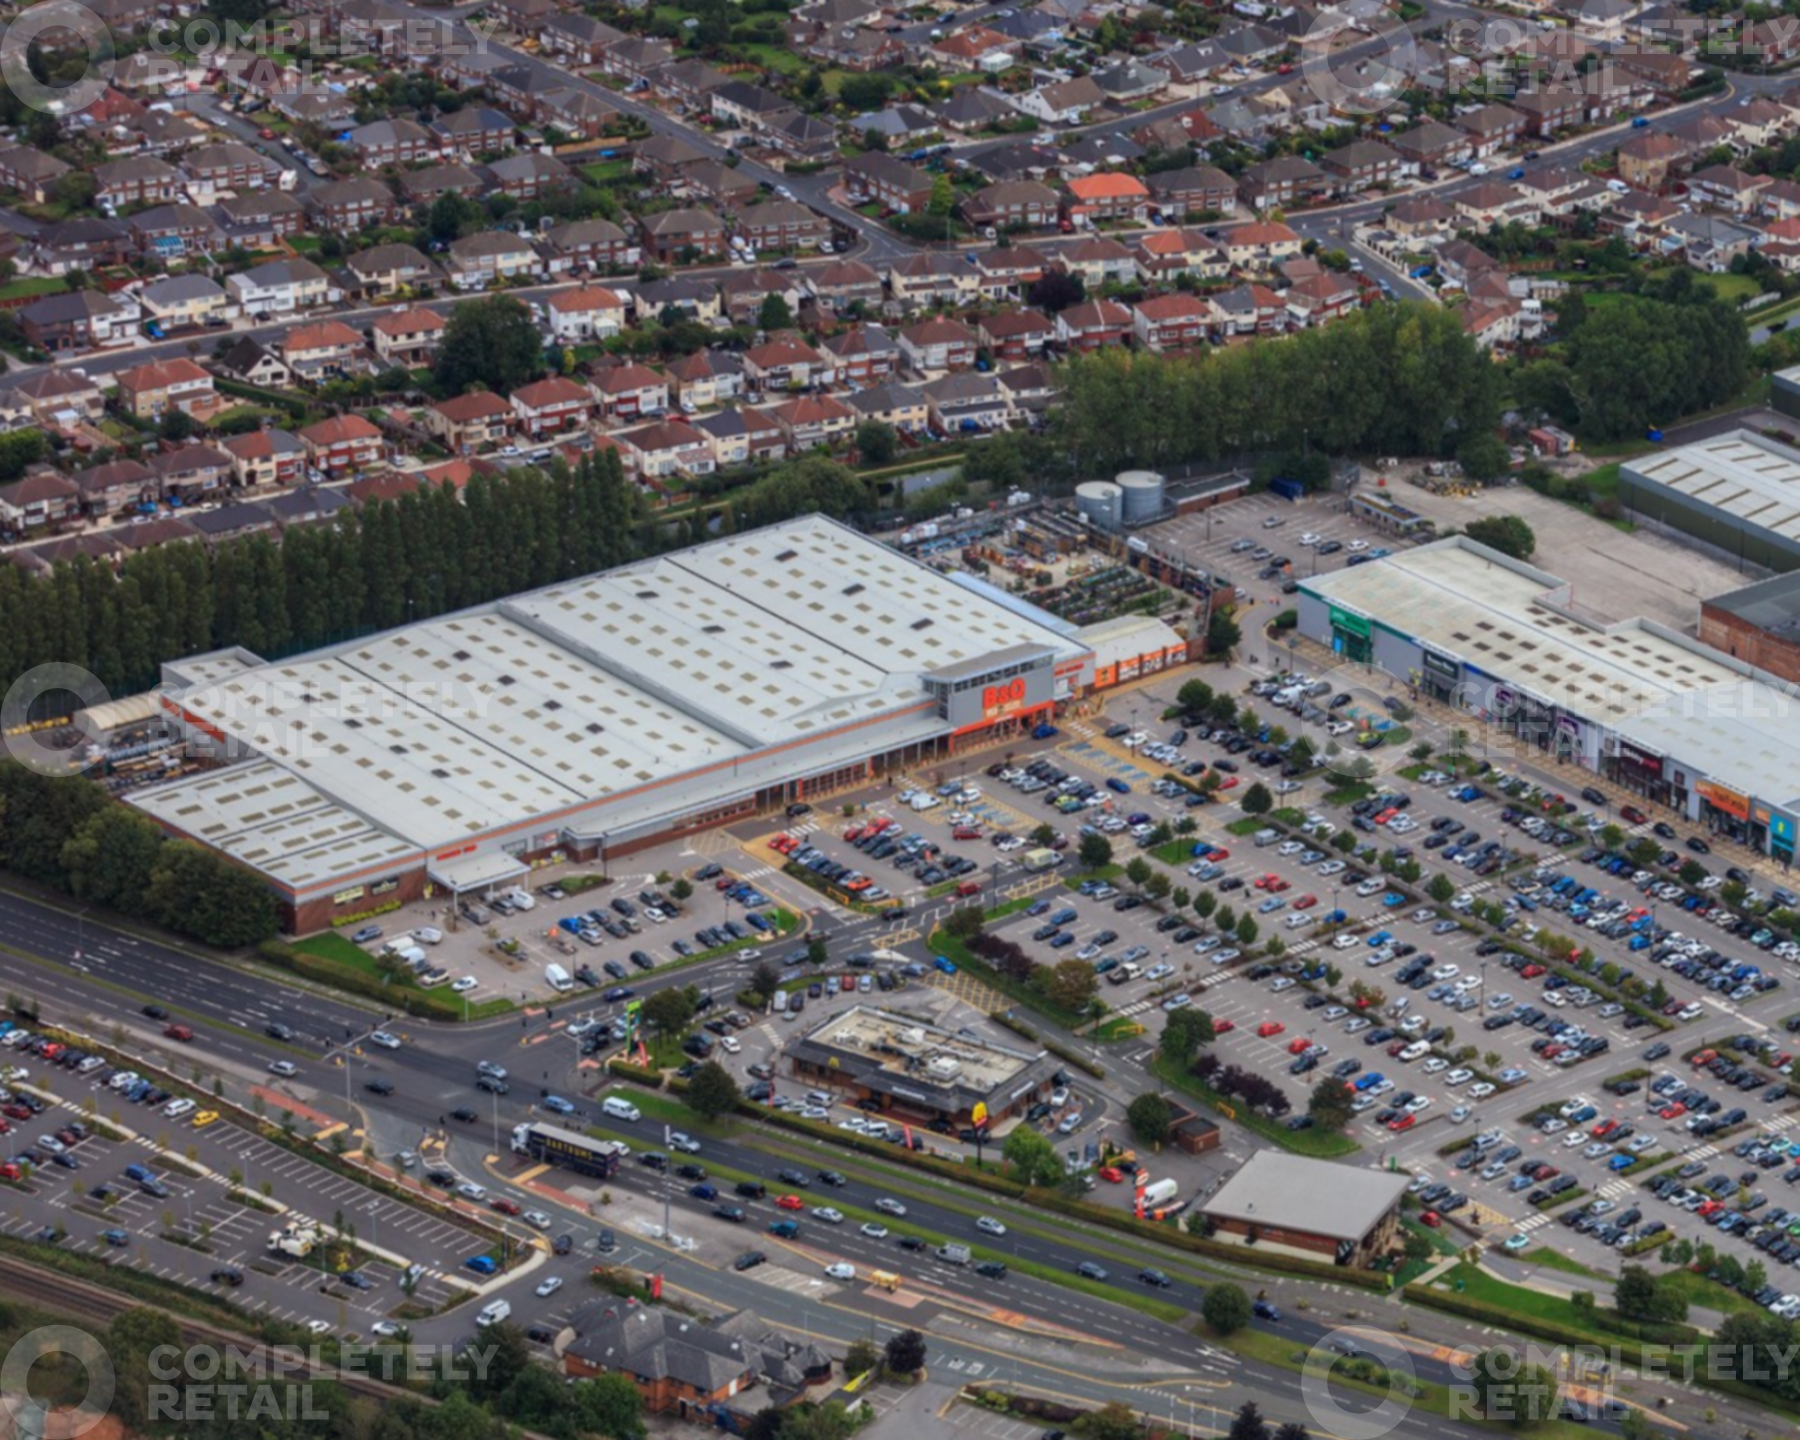 Aintree Shopping Park